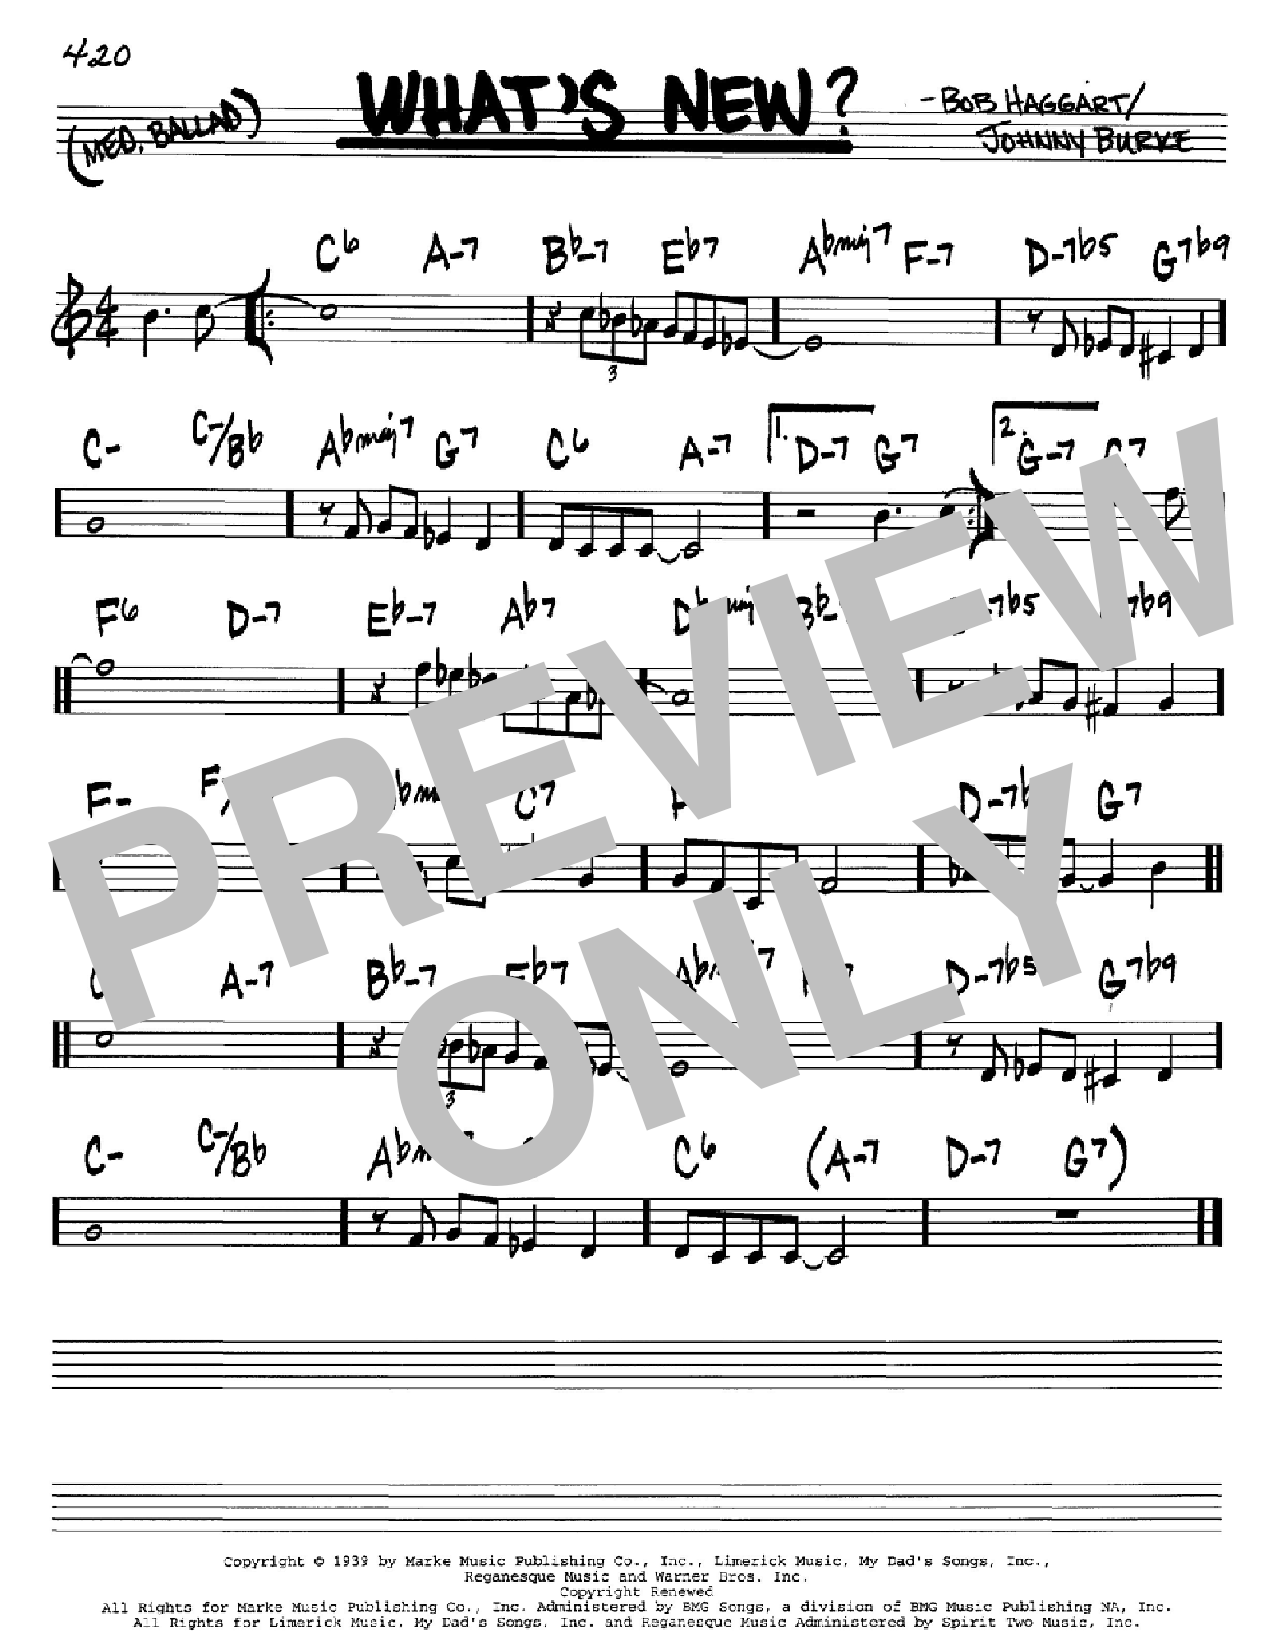 Johnny Burke What's New? sheet music notes and chords. Download Printable PDF.